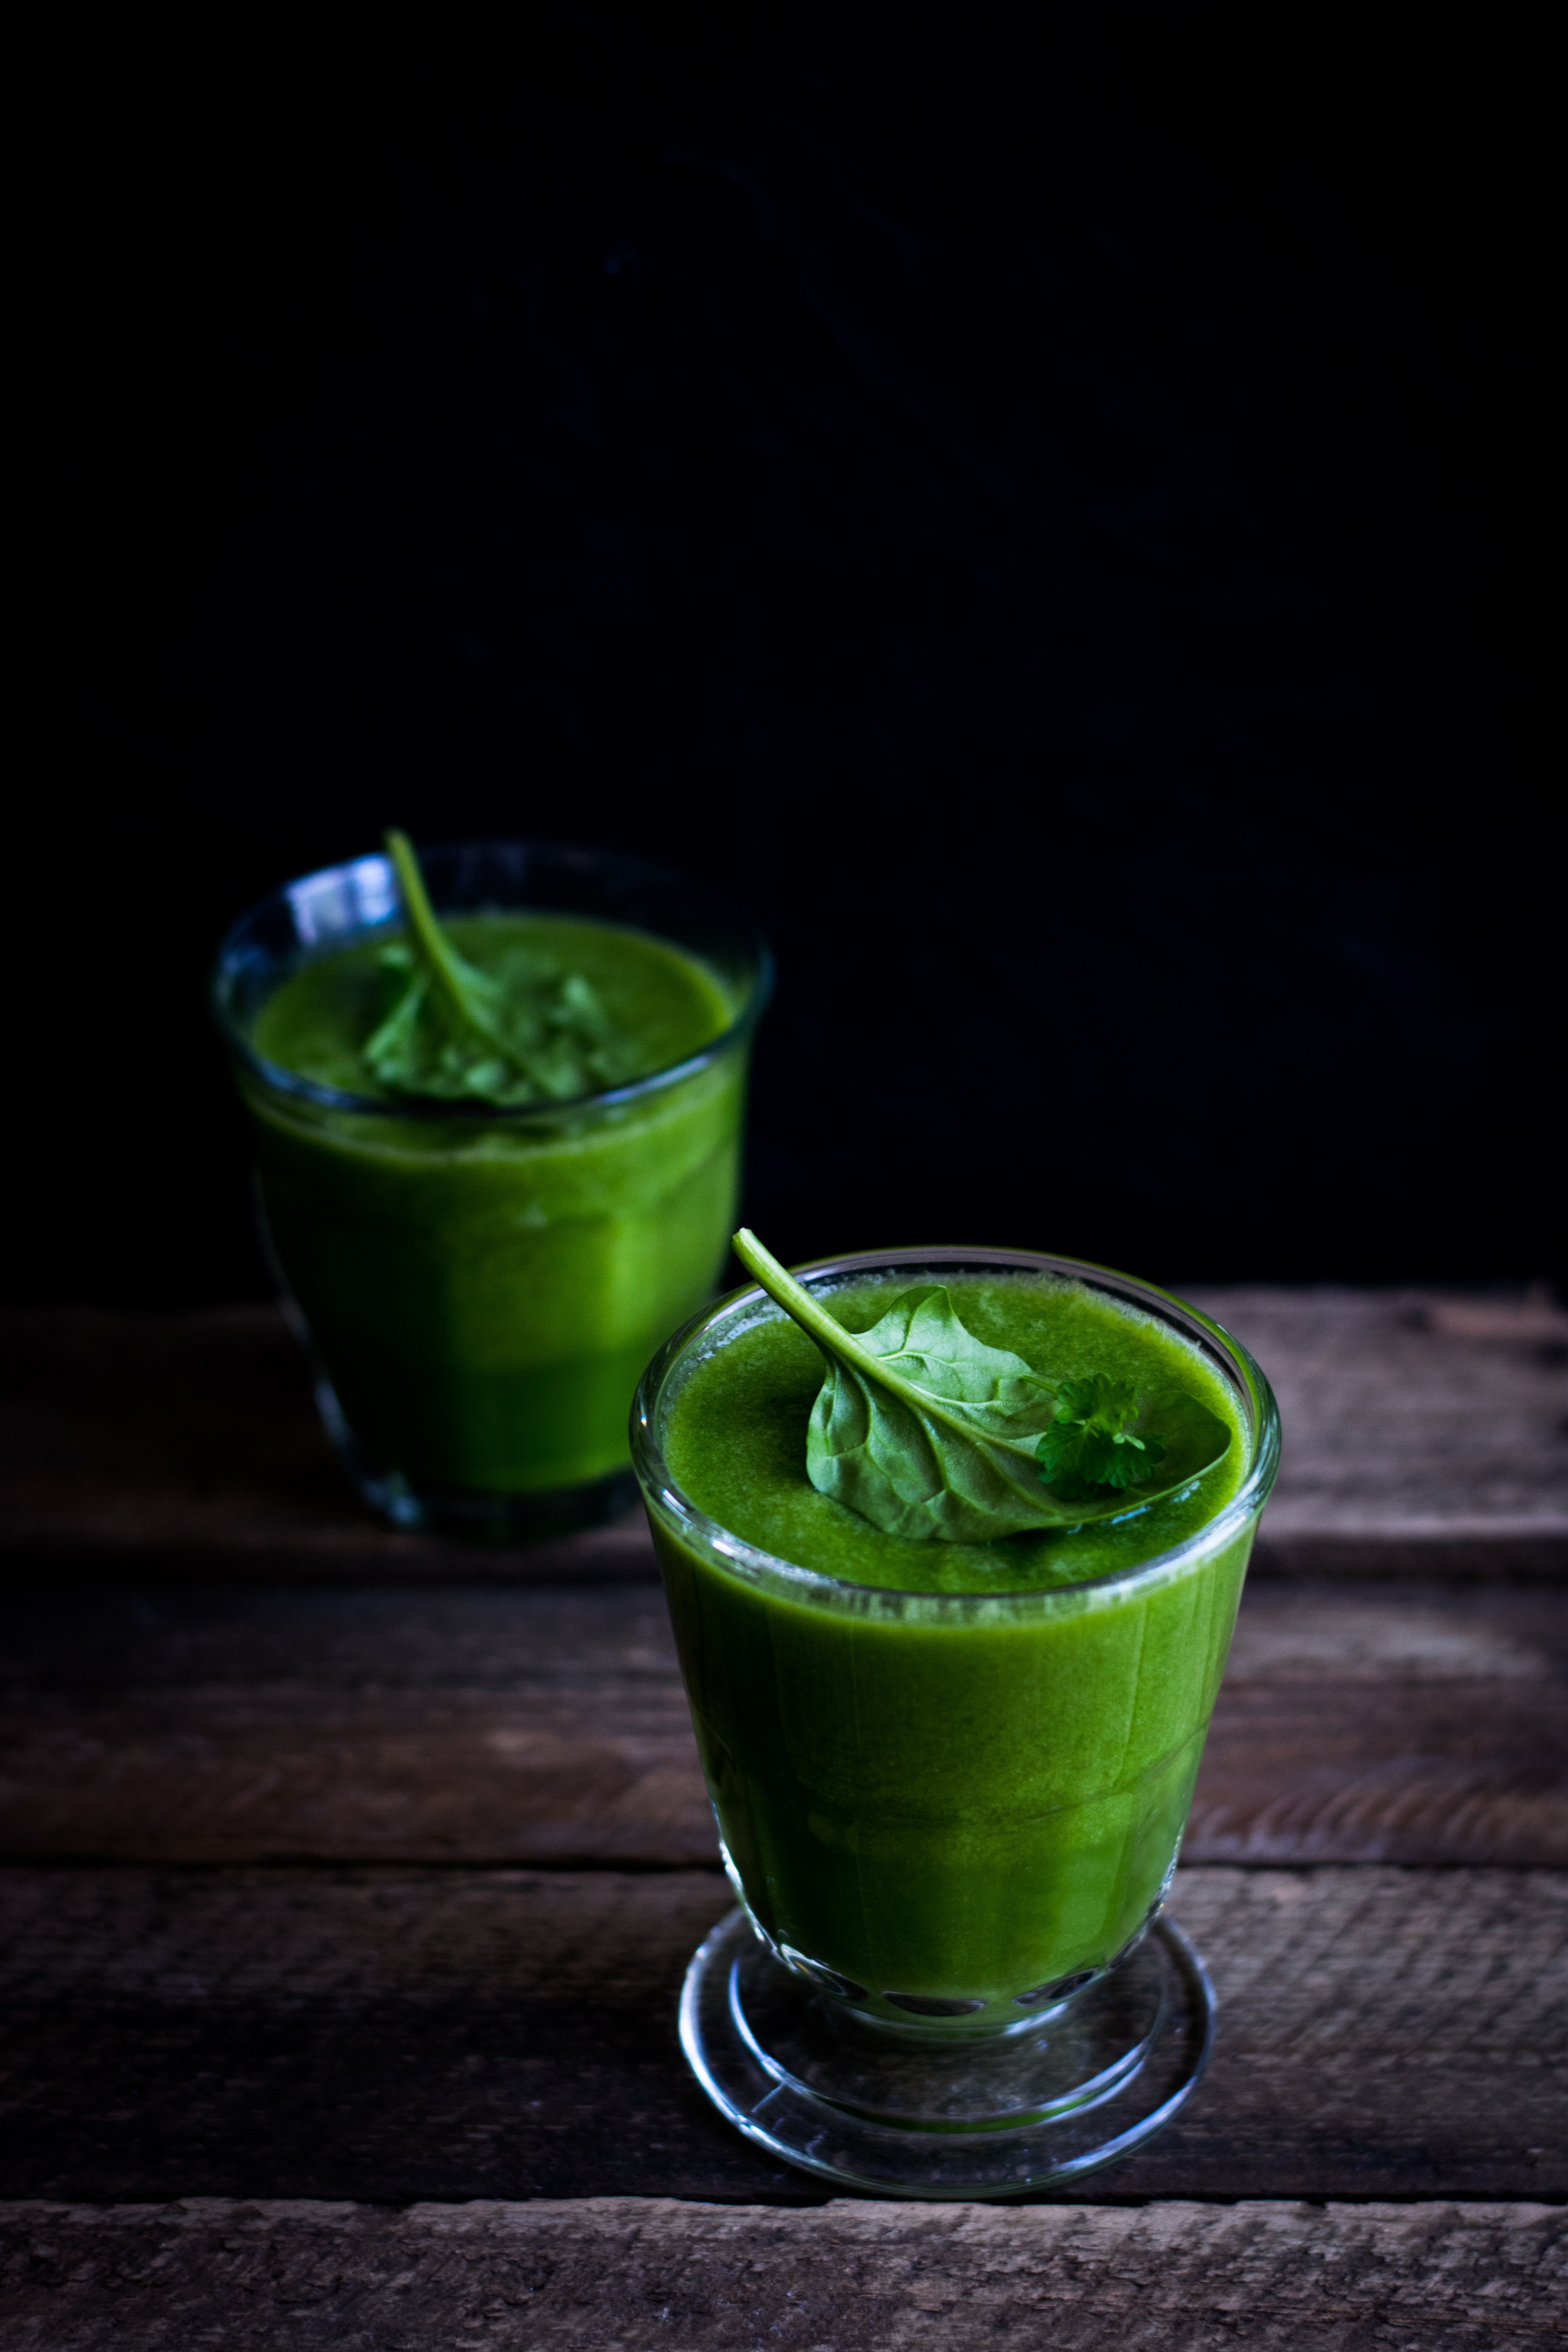 Tow green smoothies in glass on wood table